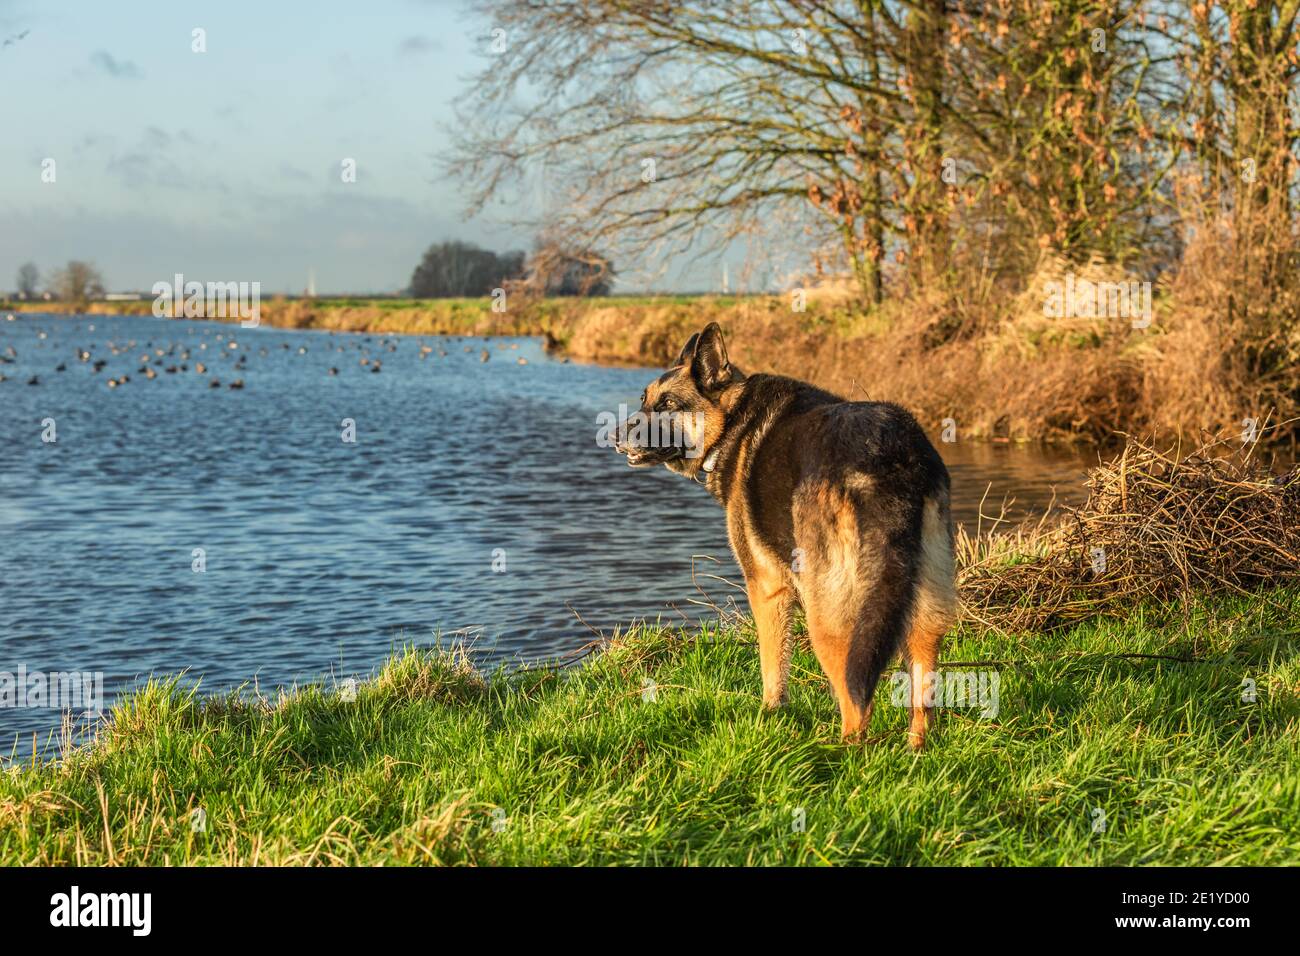 German Shepherd in focus stands on a bank in warm sunlight from the rising sun with a blurred meadow and water landscape in the background Stock Photo